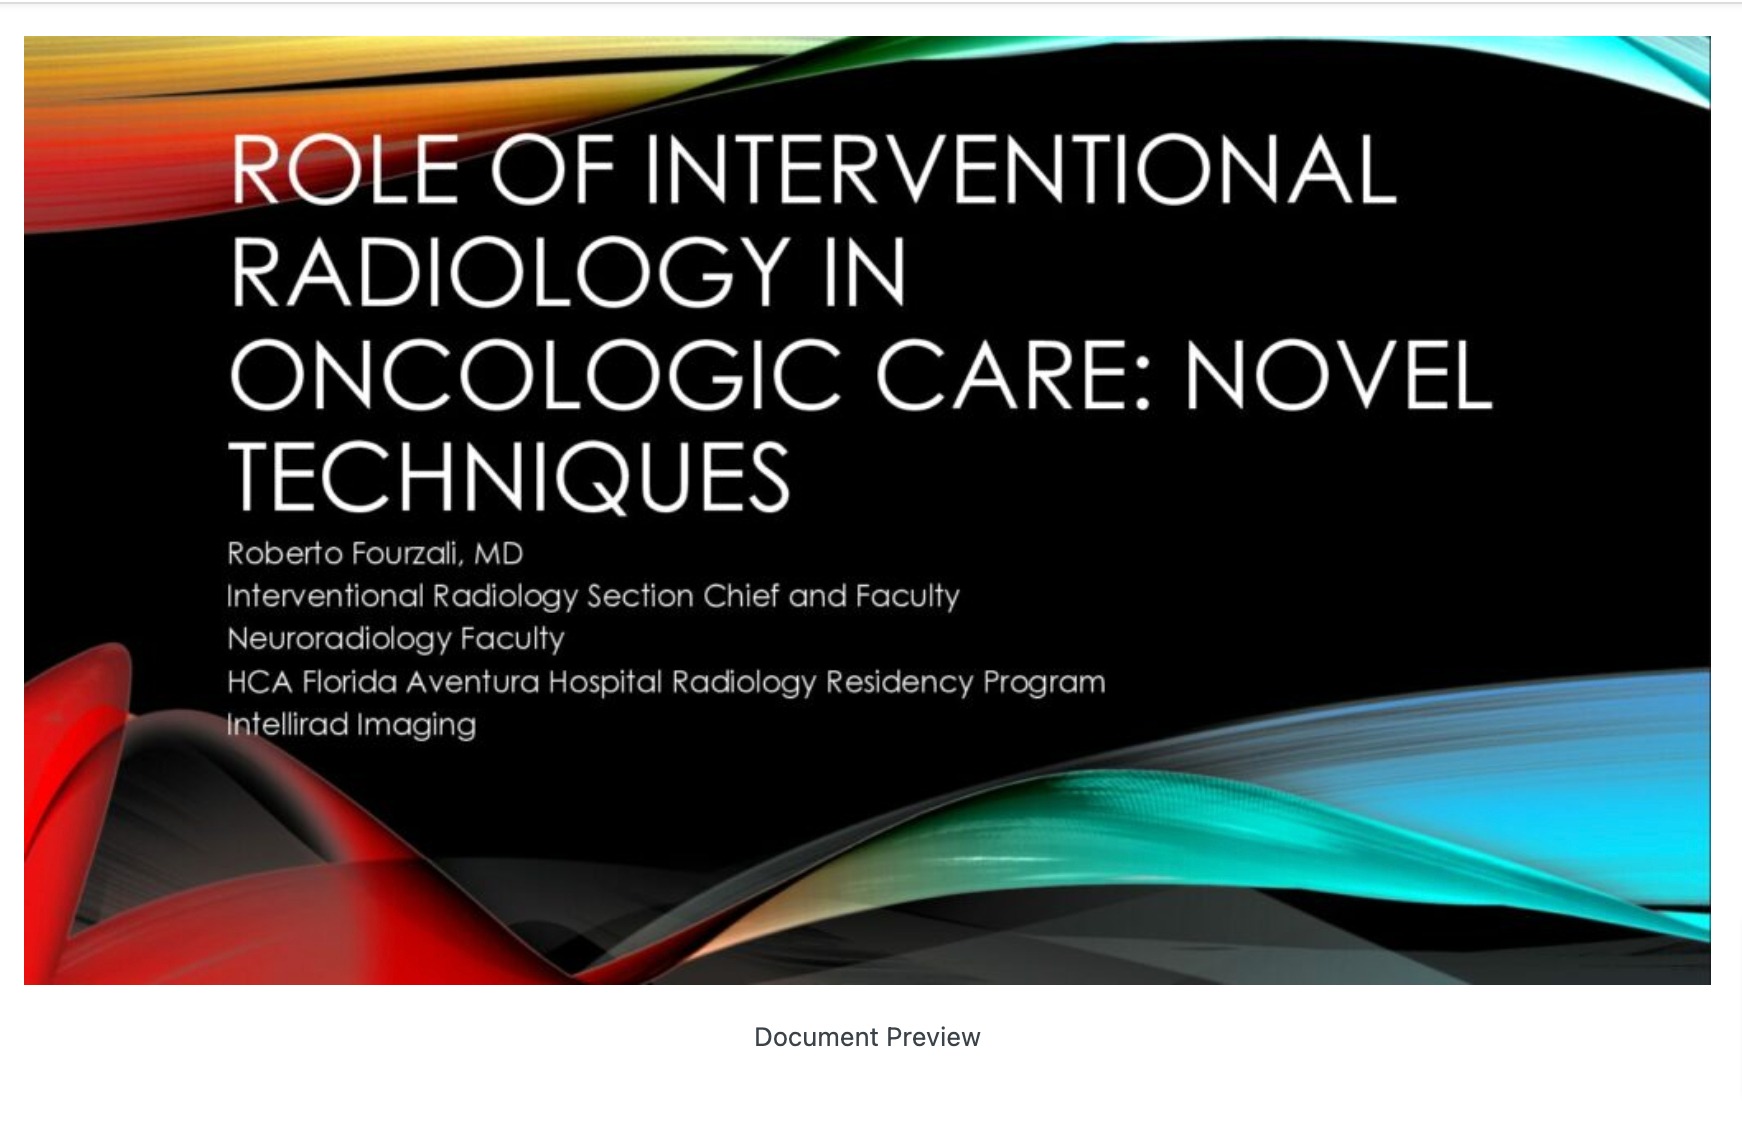 Role of Interventional Radiology in Oncology Care: Novel Techniques